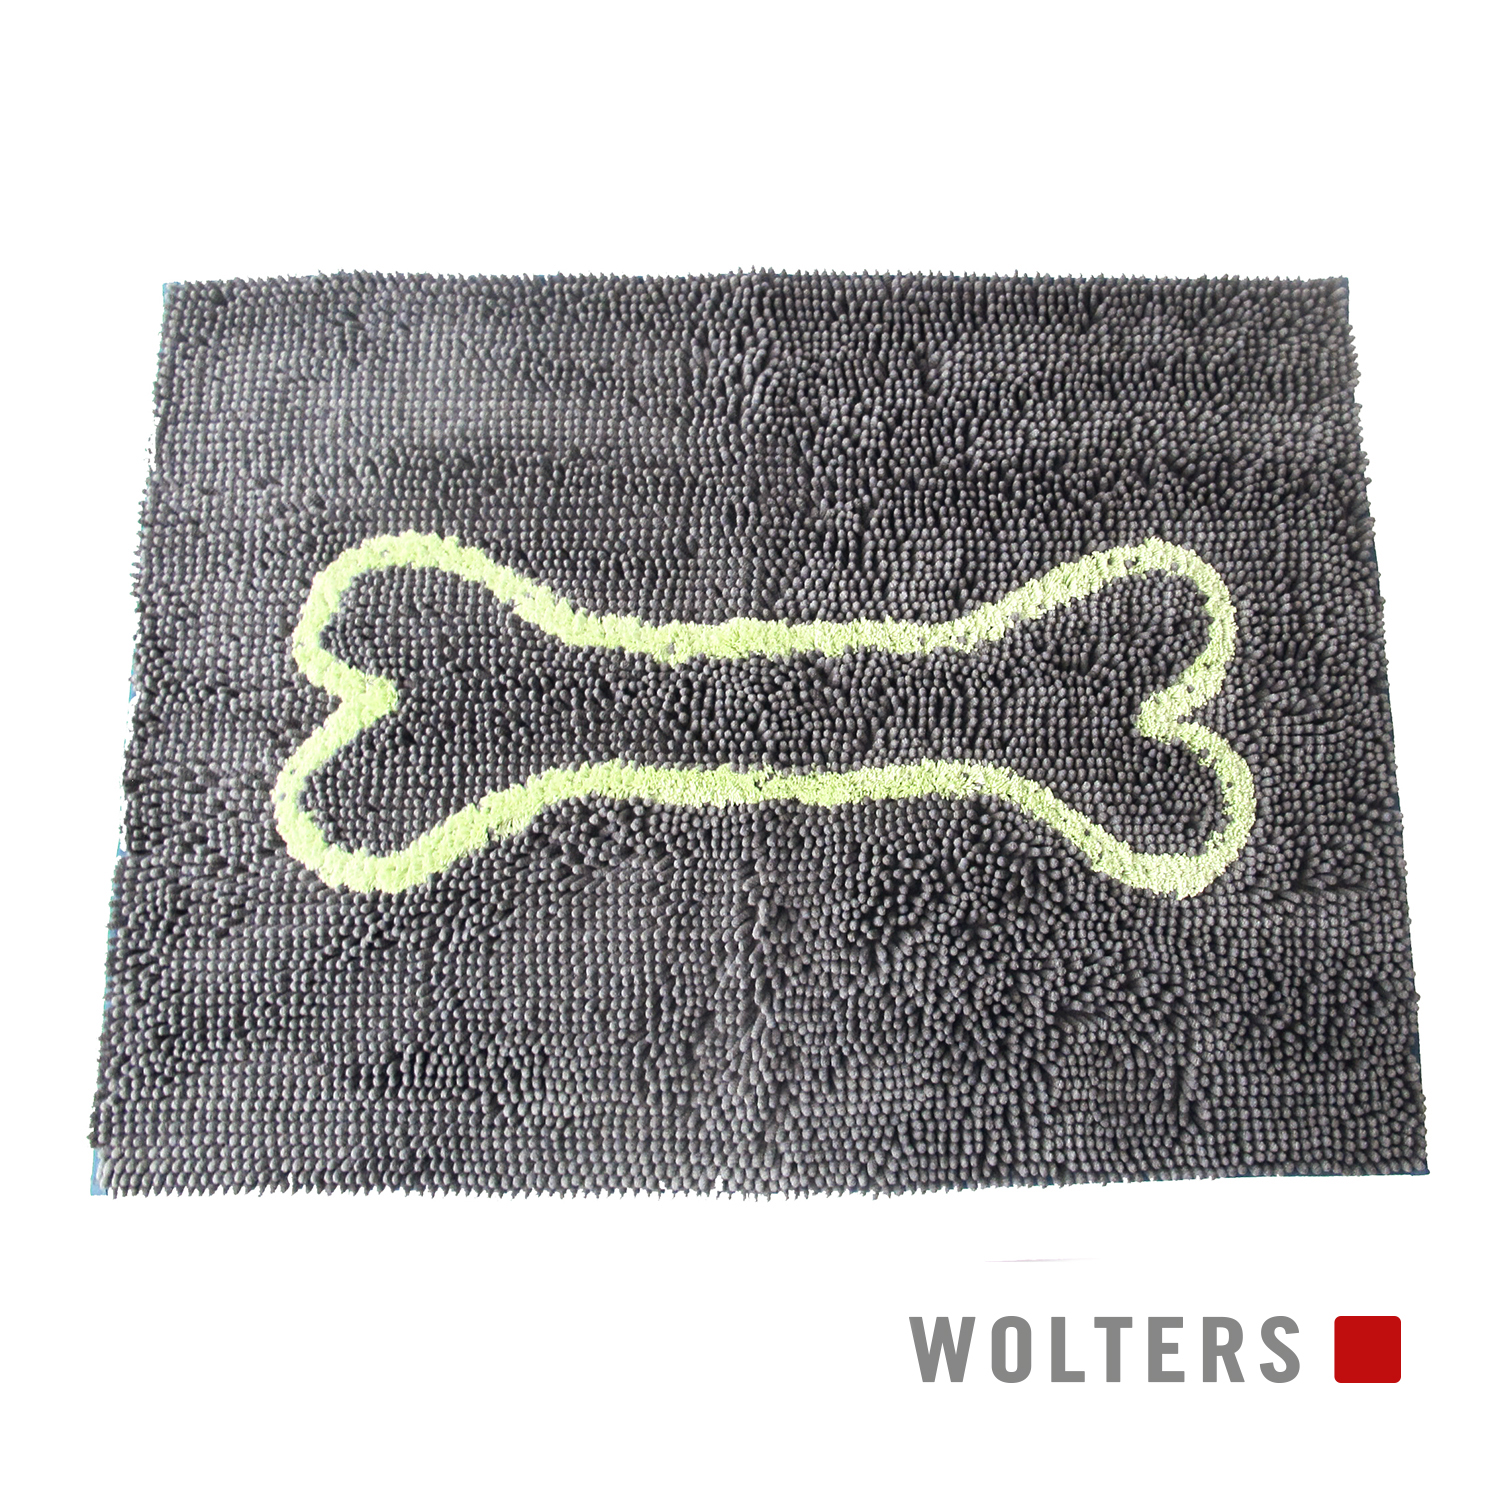 Wolters Dirty Dog Doormat - Special Edition, grau/lime